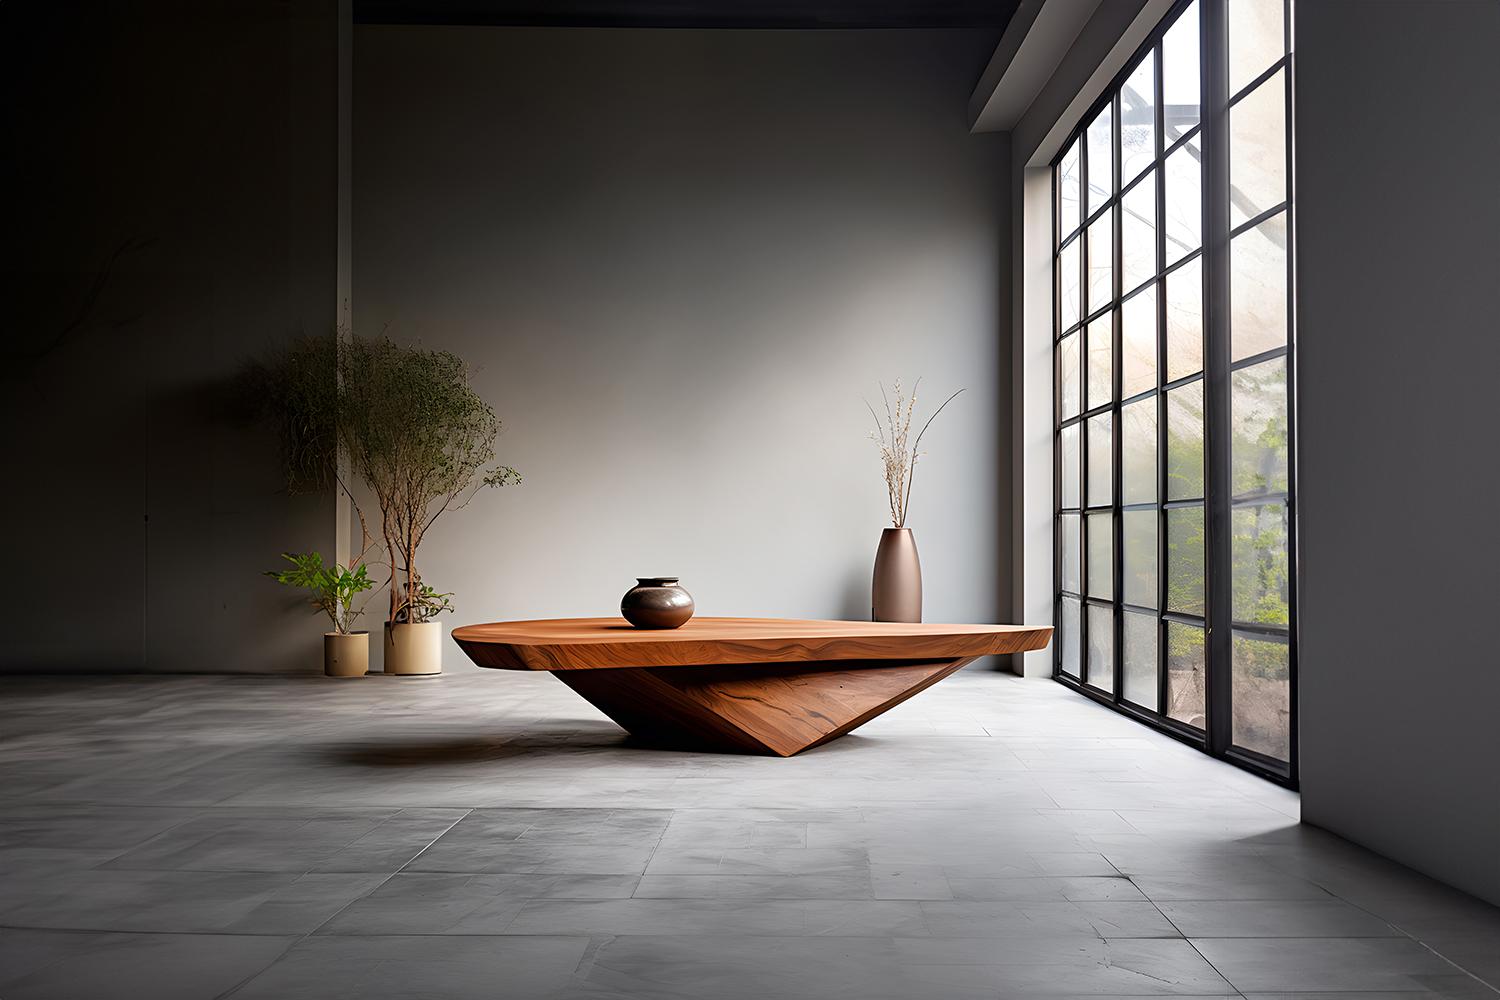 Sculptural Coffee Table Made of Solid Wood, Center Table Solace S24 by Joel Escalona


The Solace table series, designed by Joel Escalona, is a furniture collection that exudes balance and presence, thanks to its sensuous, dense, and irregular